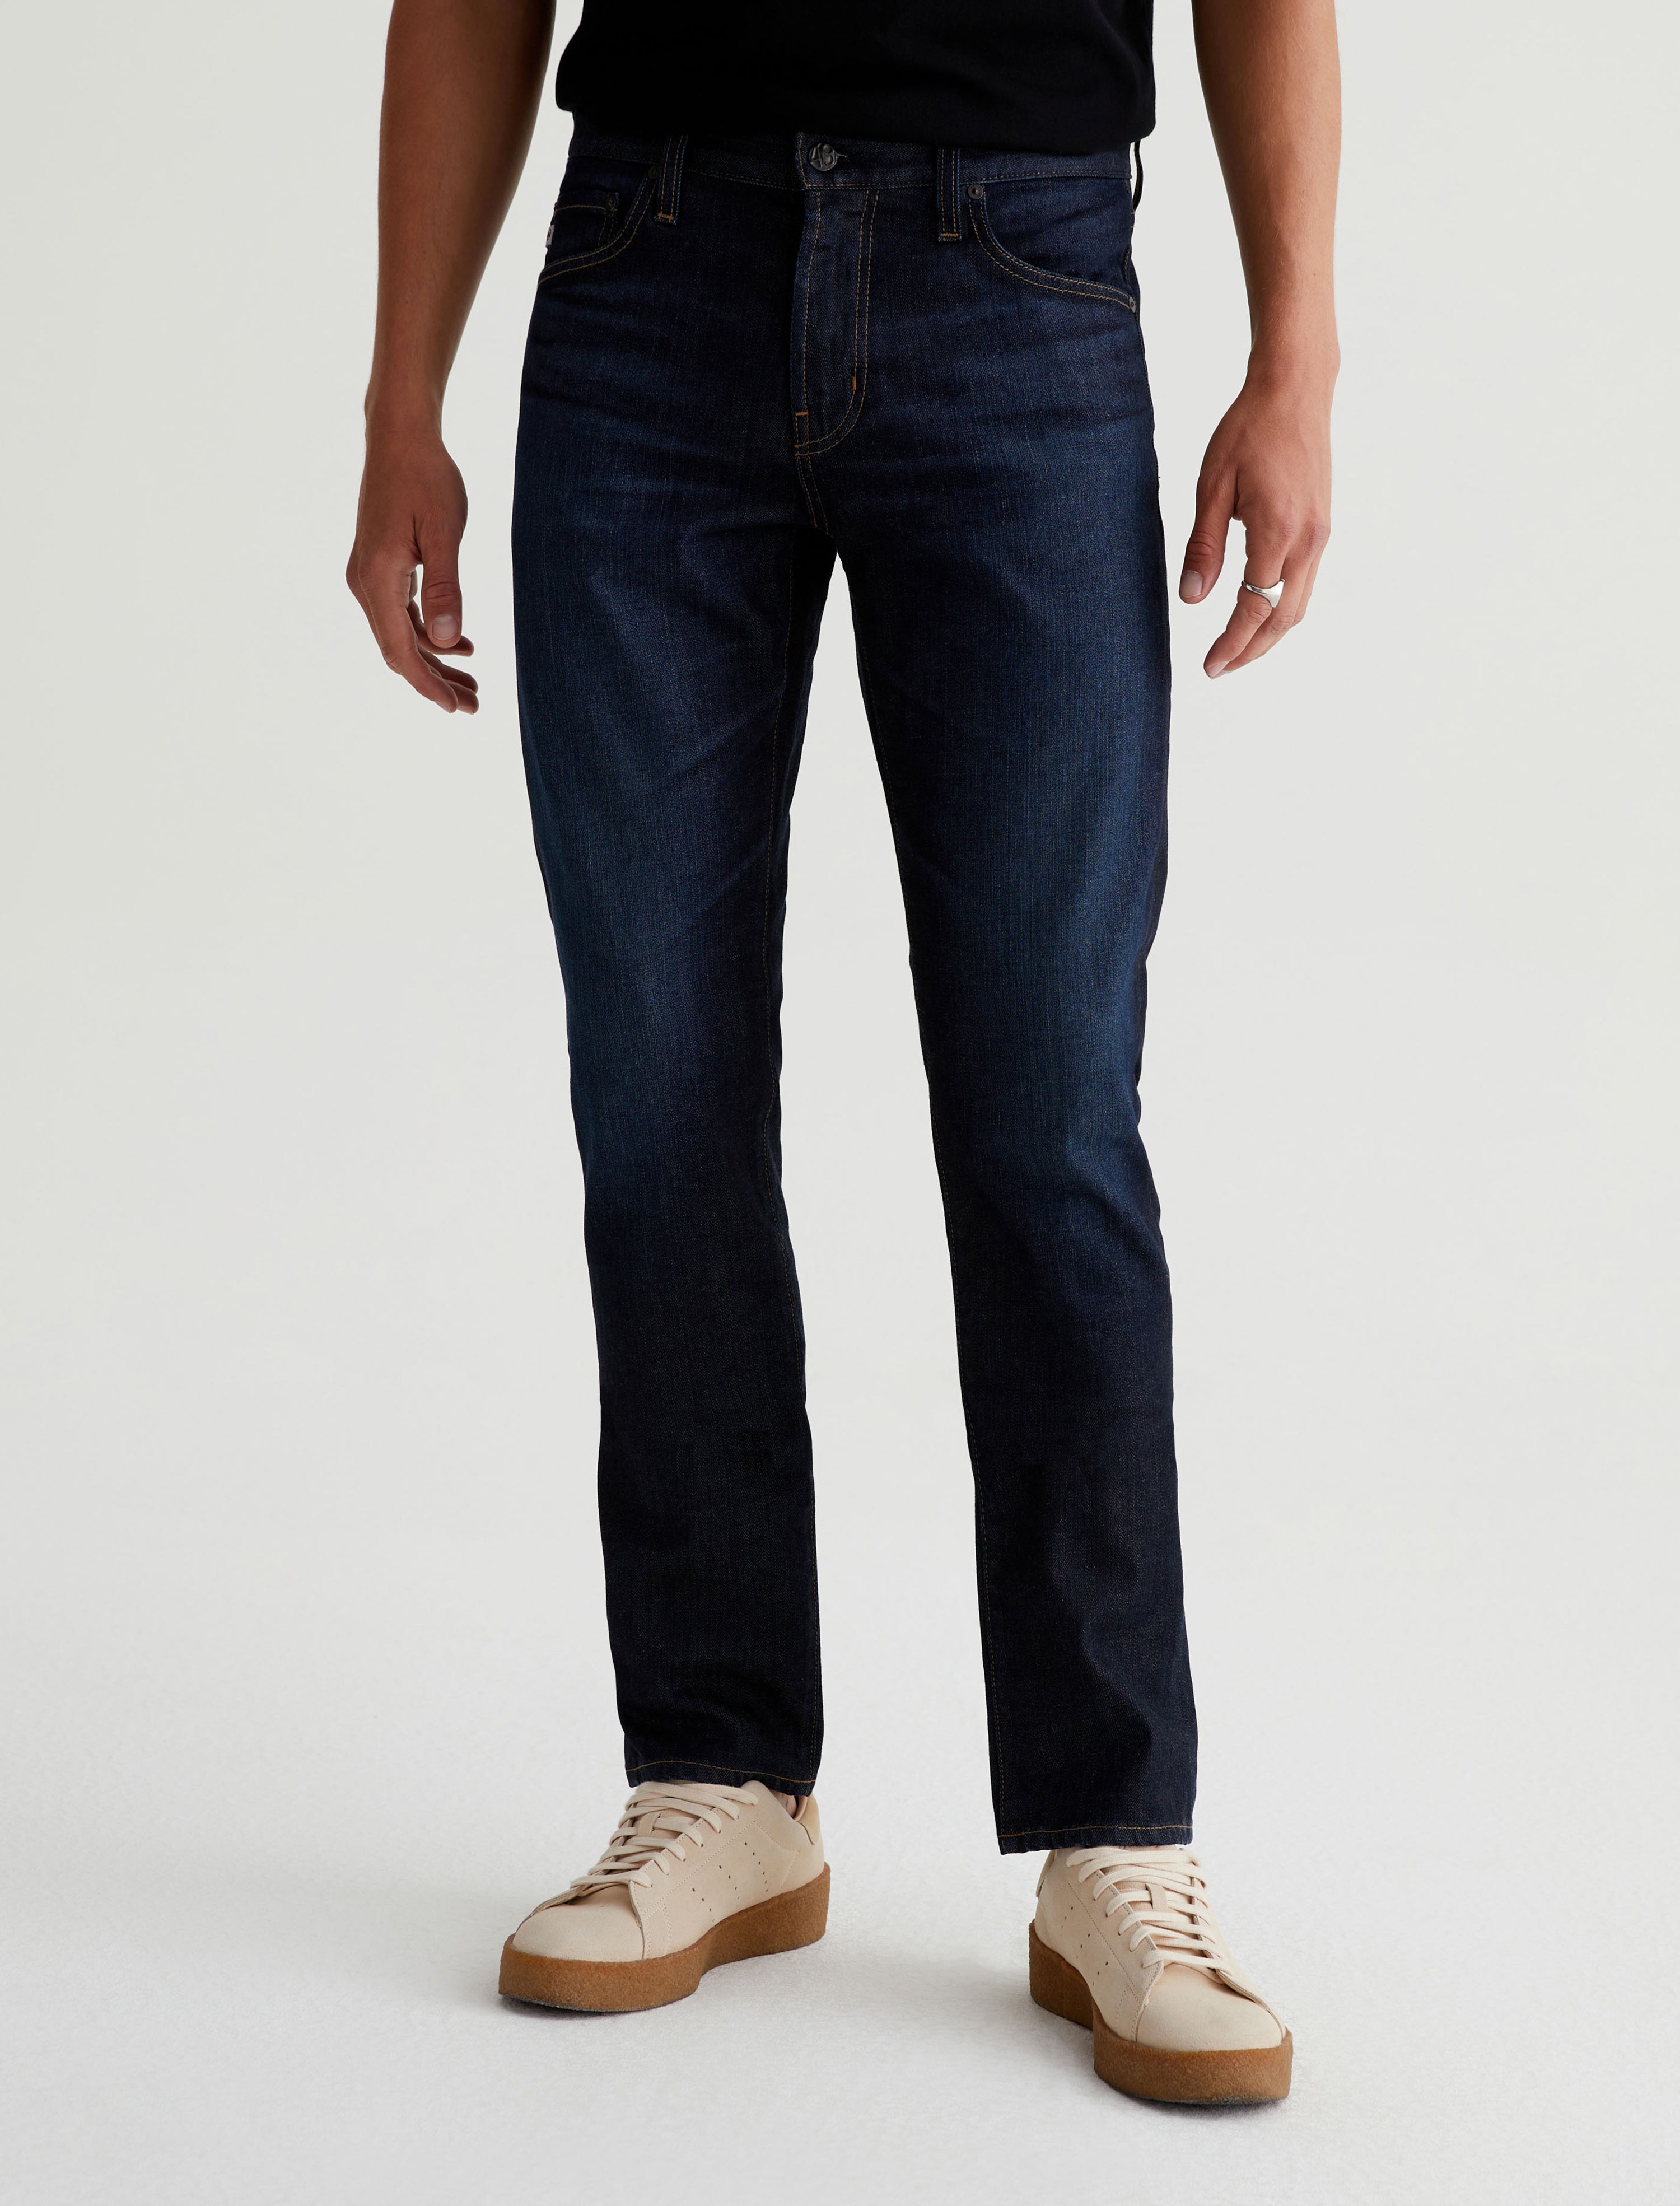 Mens Tellis 4 Years Sedona at AG Jeans Official Store